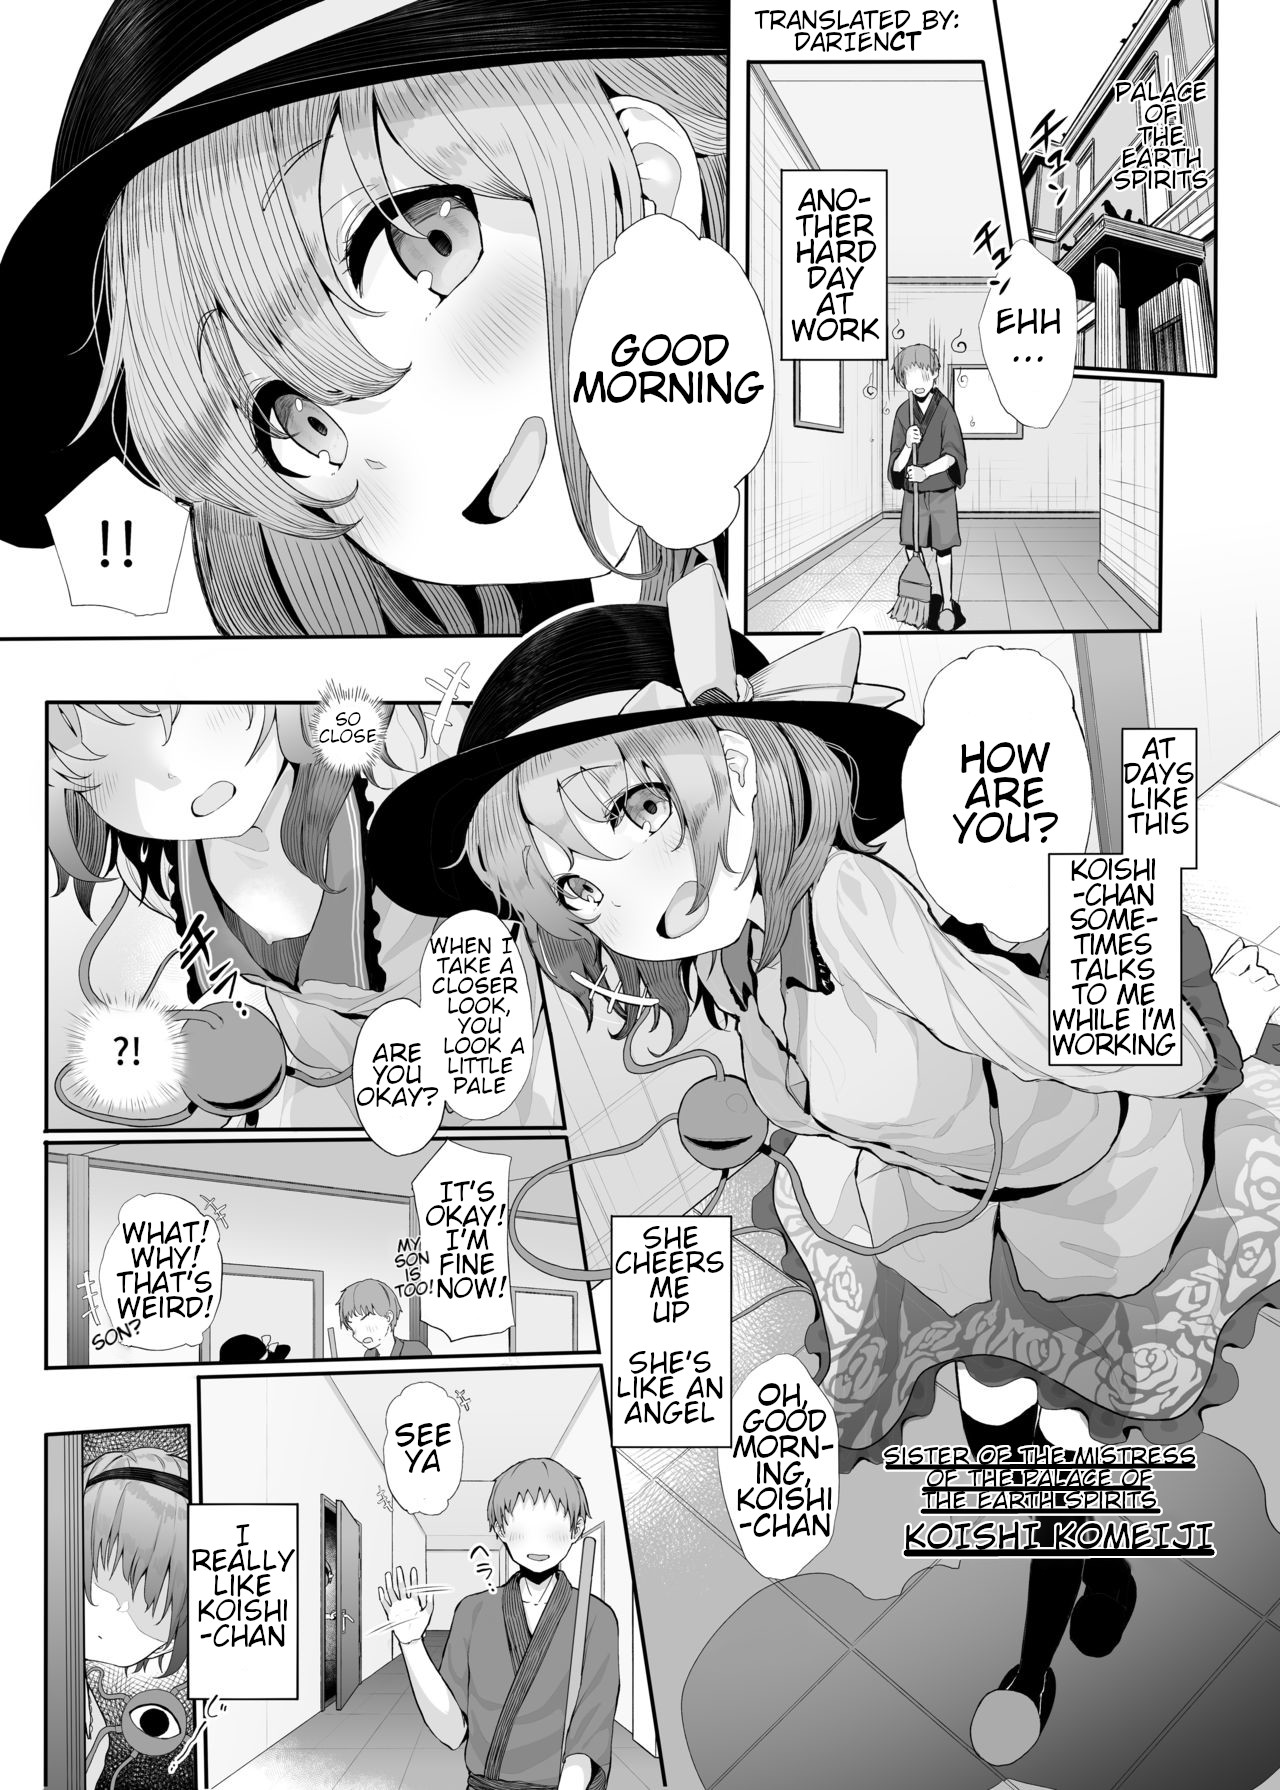 Hentai Manga Comic-So You Have That Kind of Fetish?-Read-2